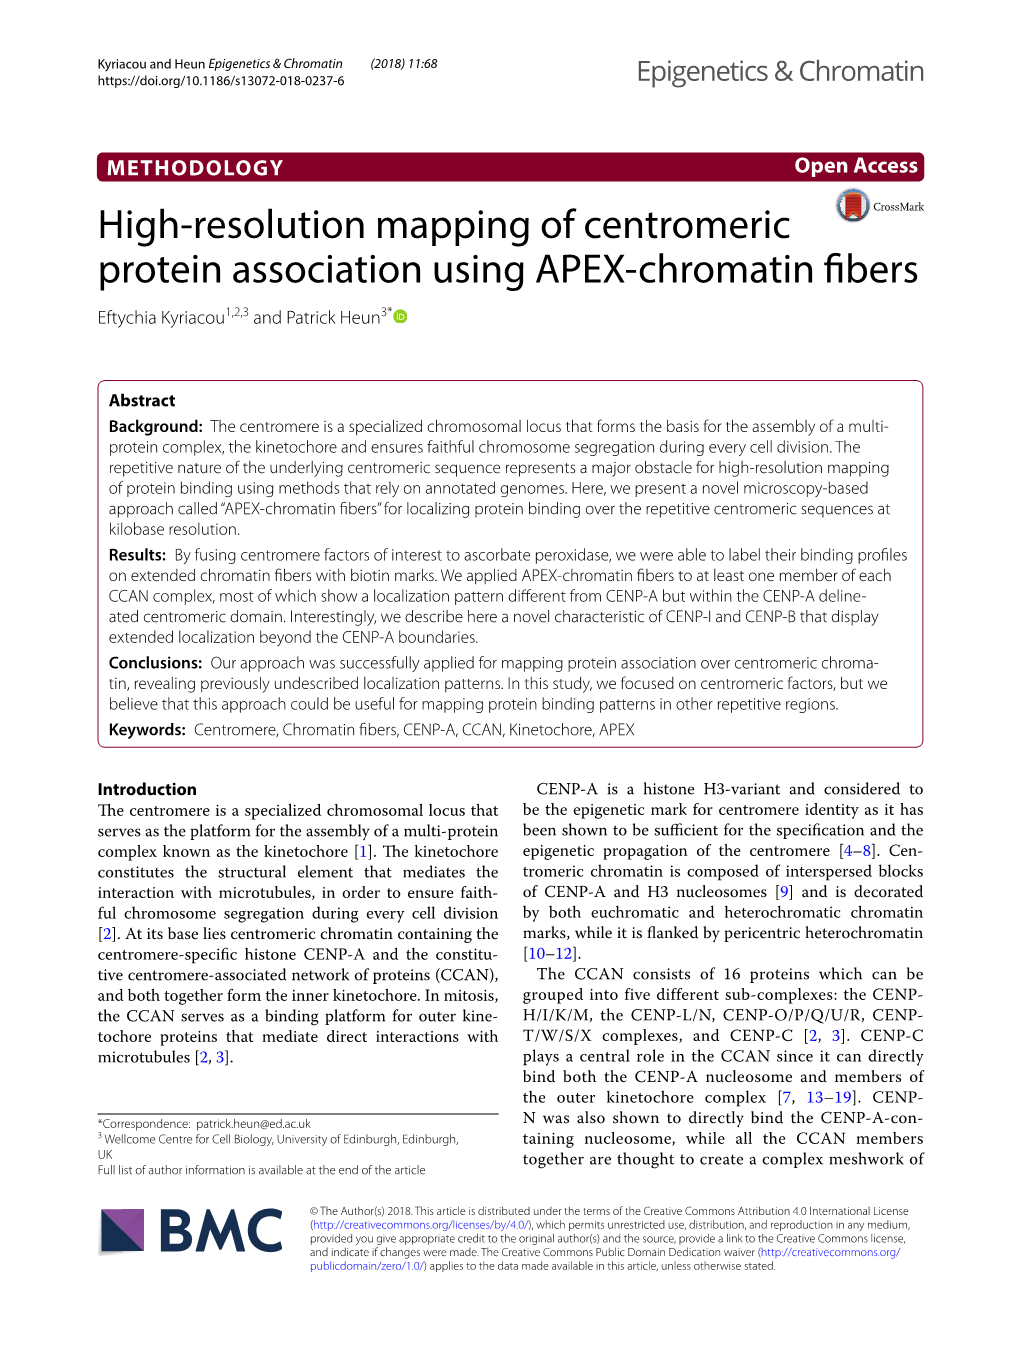 High-Resolution Mapping of Centromeric Protein Association